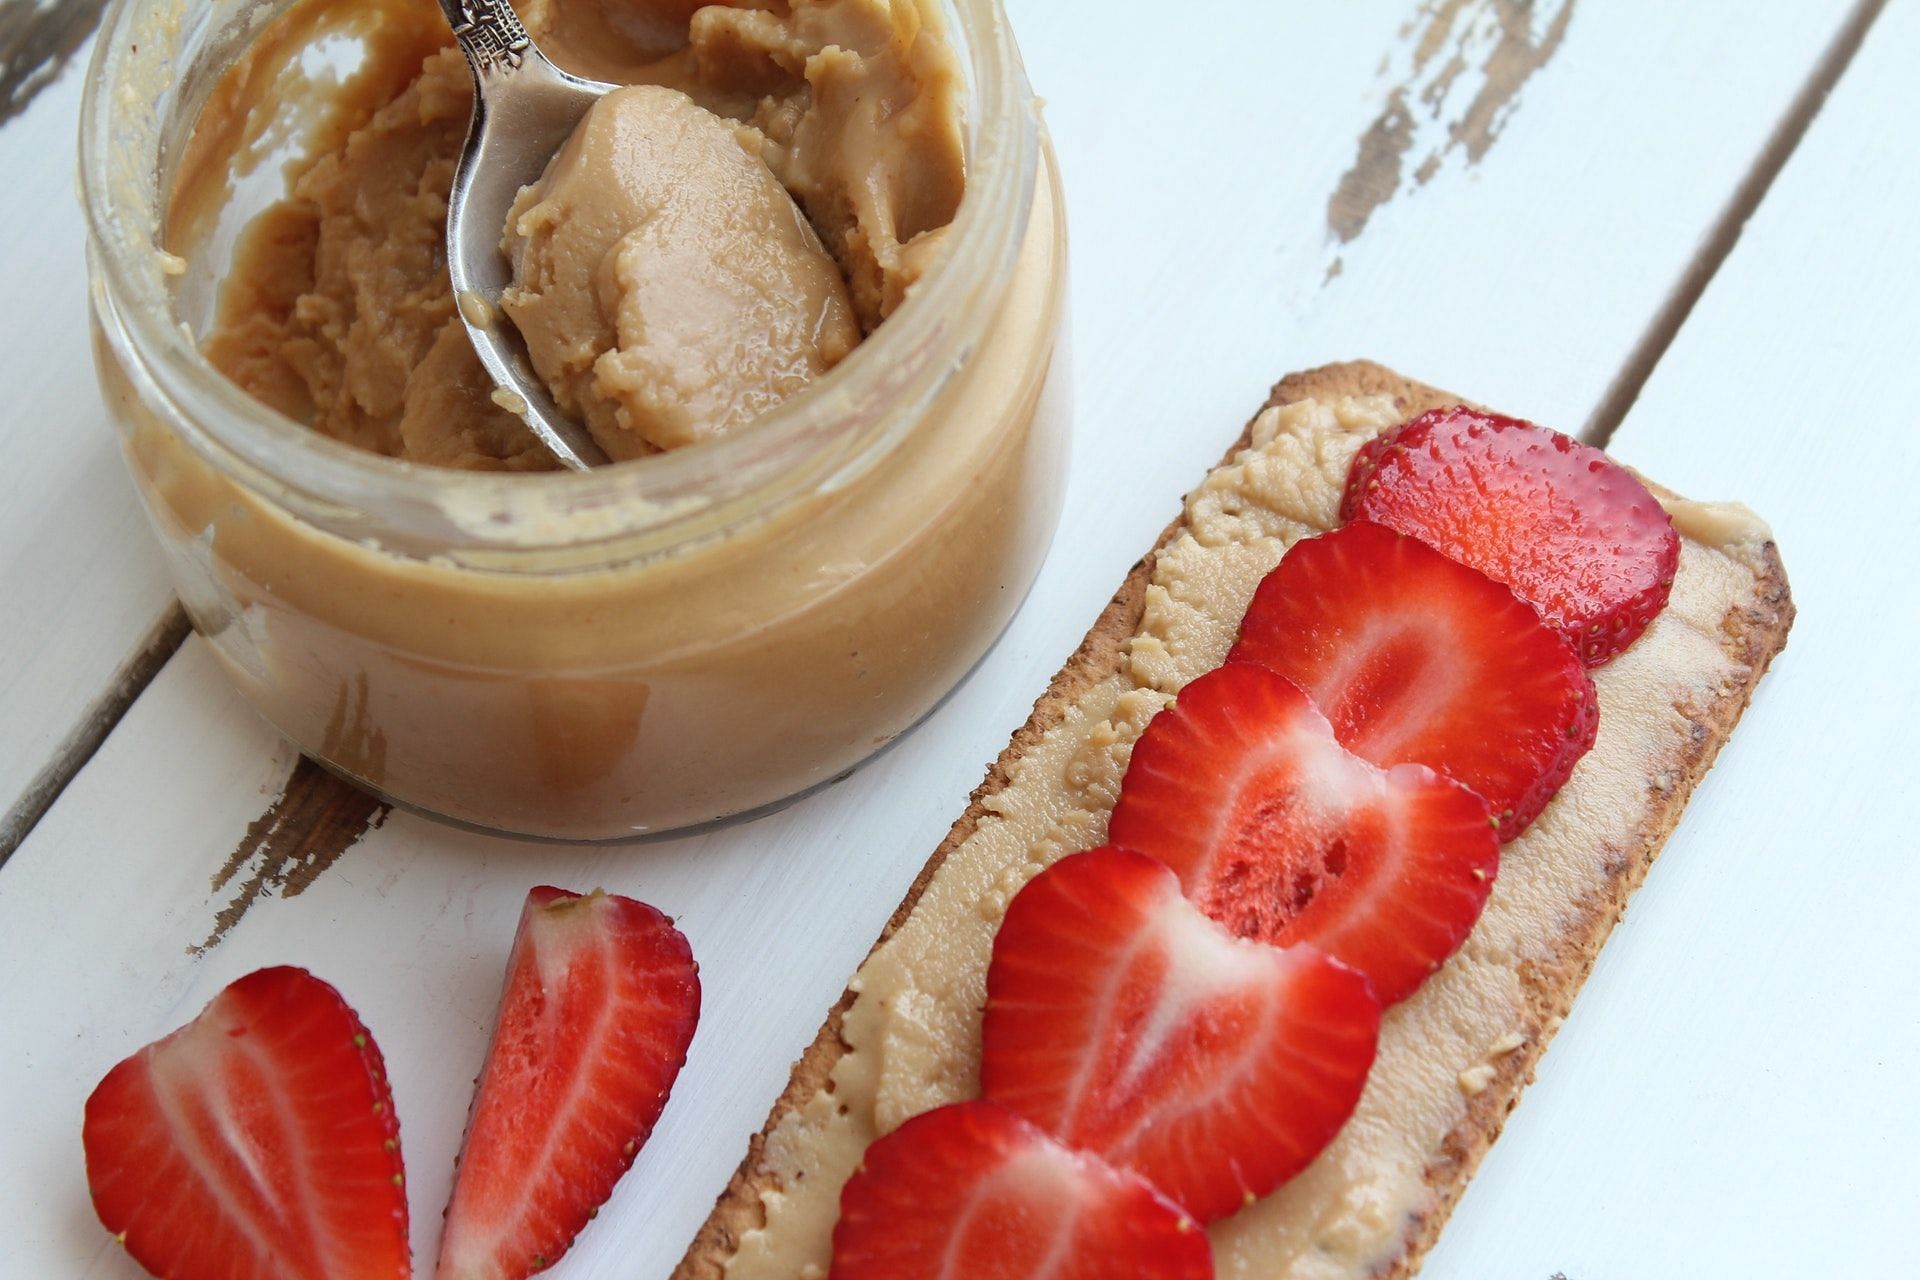 Peanut butter is a good option to avail the benefits of peanuts. (Photo by Pixabay via pexels)